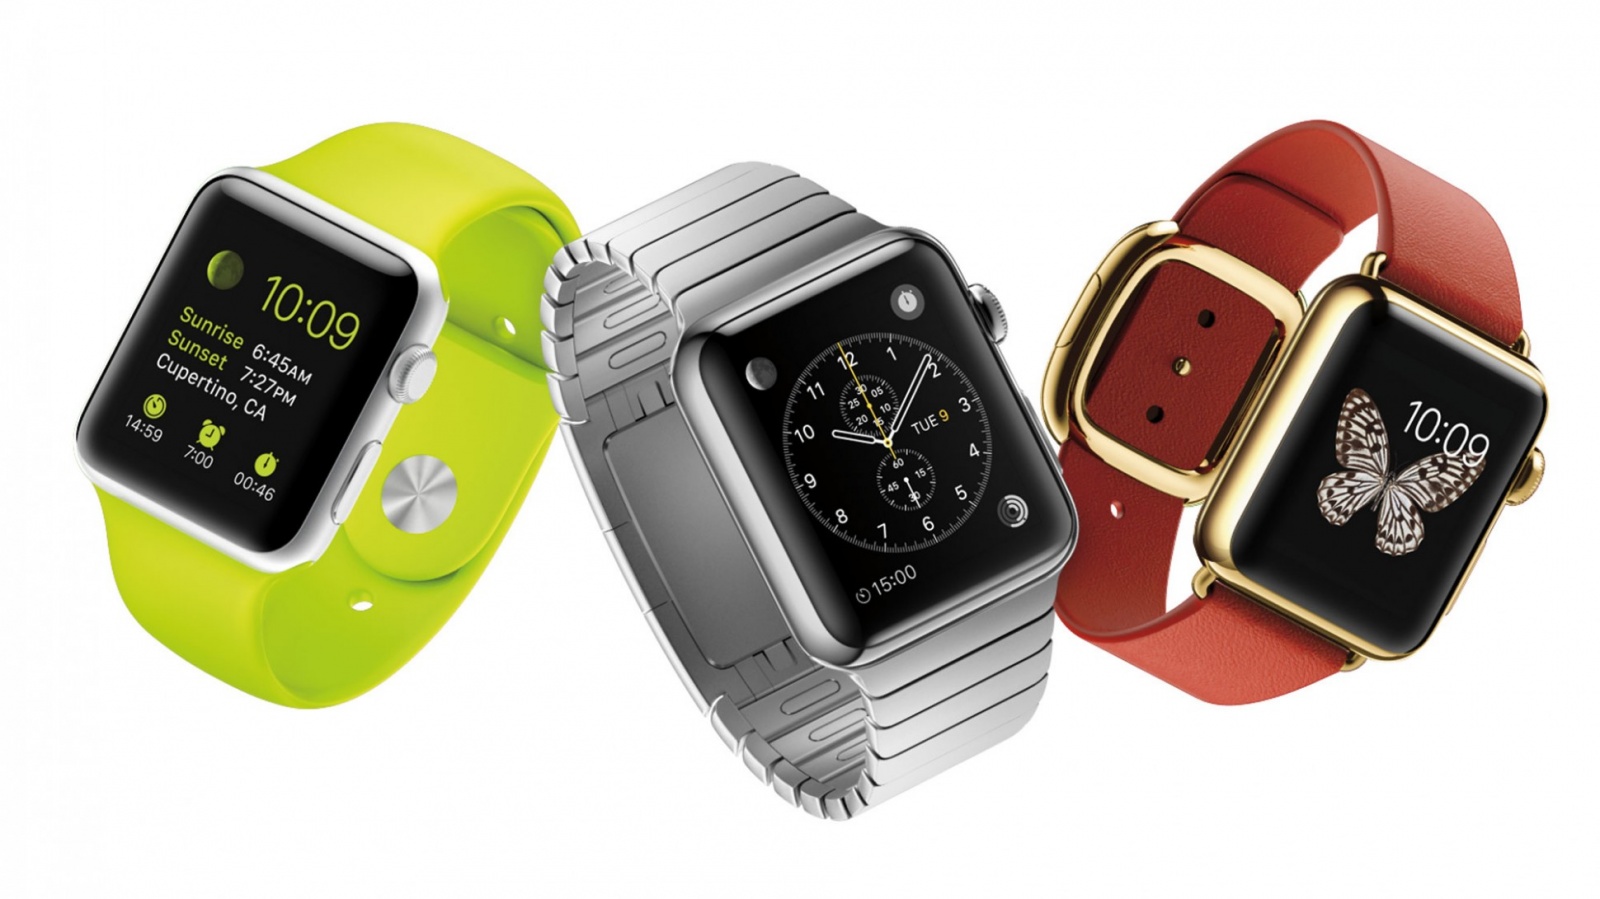 As smartwatches grow in popularity, the Apple Watch will continue to be the hands-on - or wrist-on - favorite.